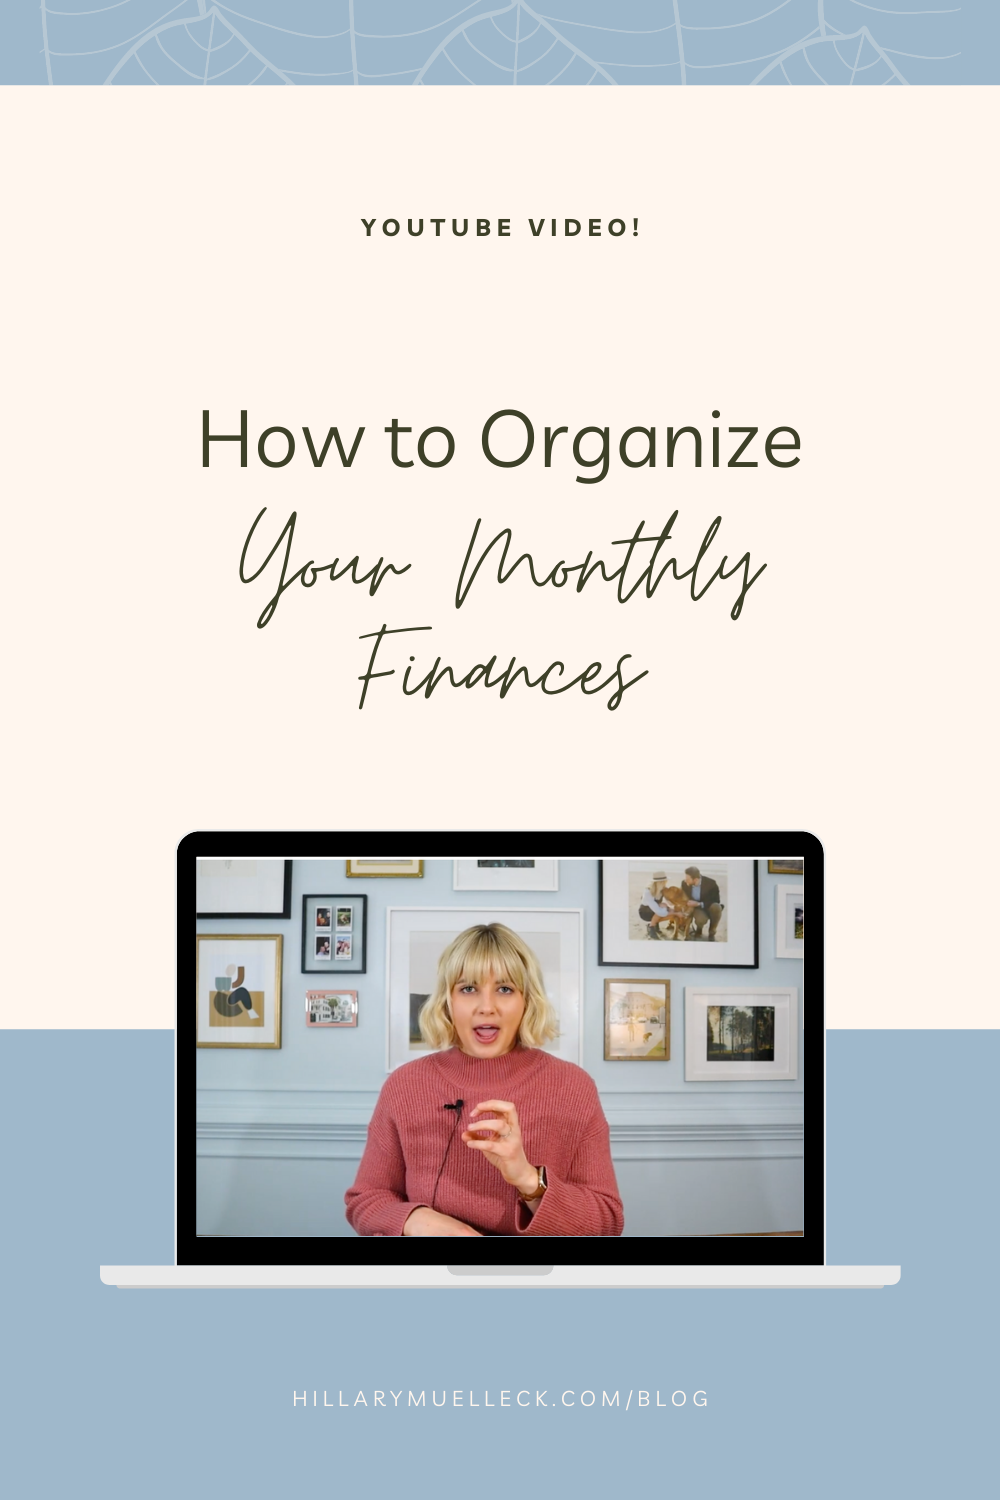 How to Organize your Monthly Business Finances as a Small Business Owner shared by wedding photographer Hillary Muelleck